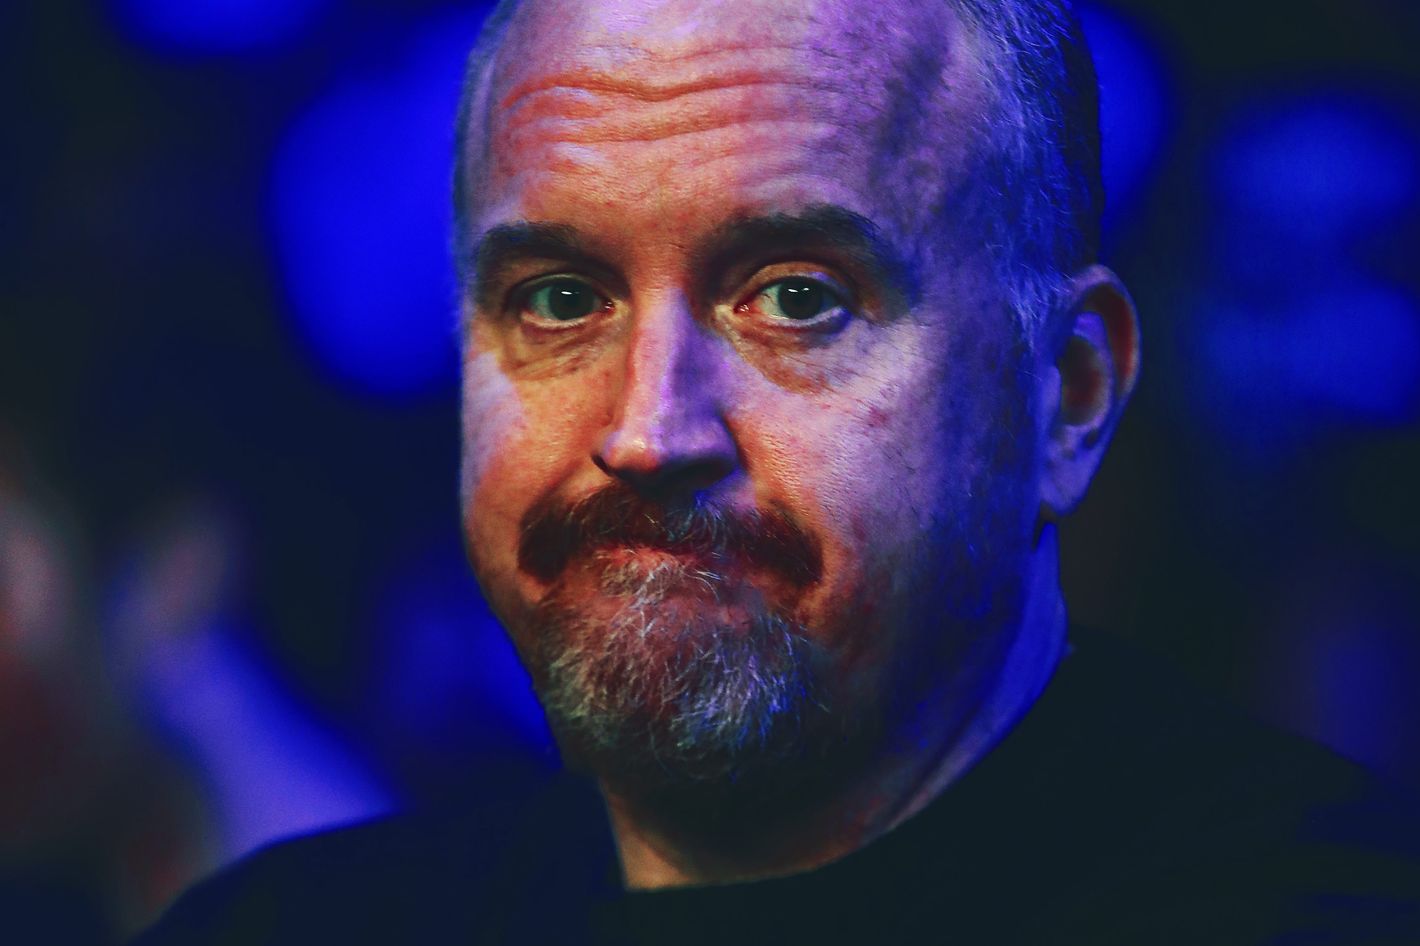 Louis CK jokes about his penis and having sex with younger women